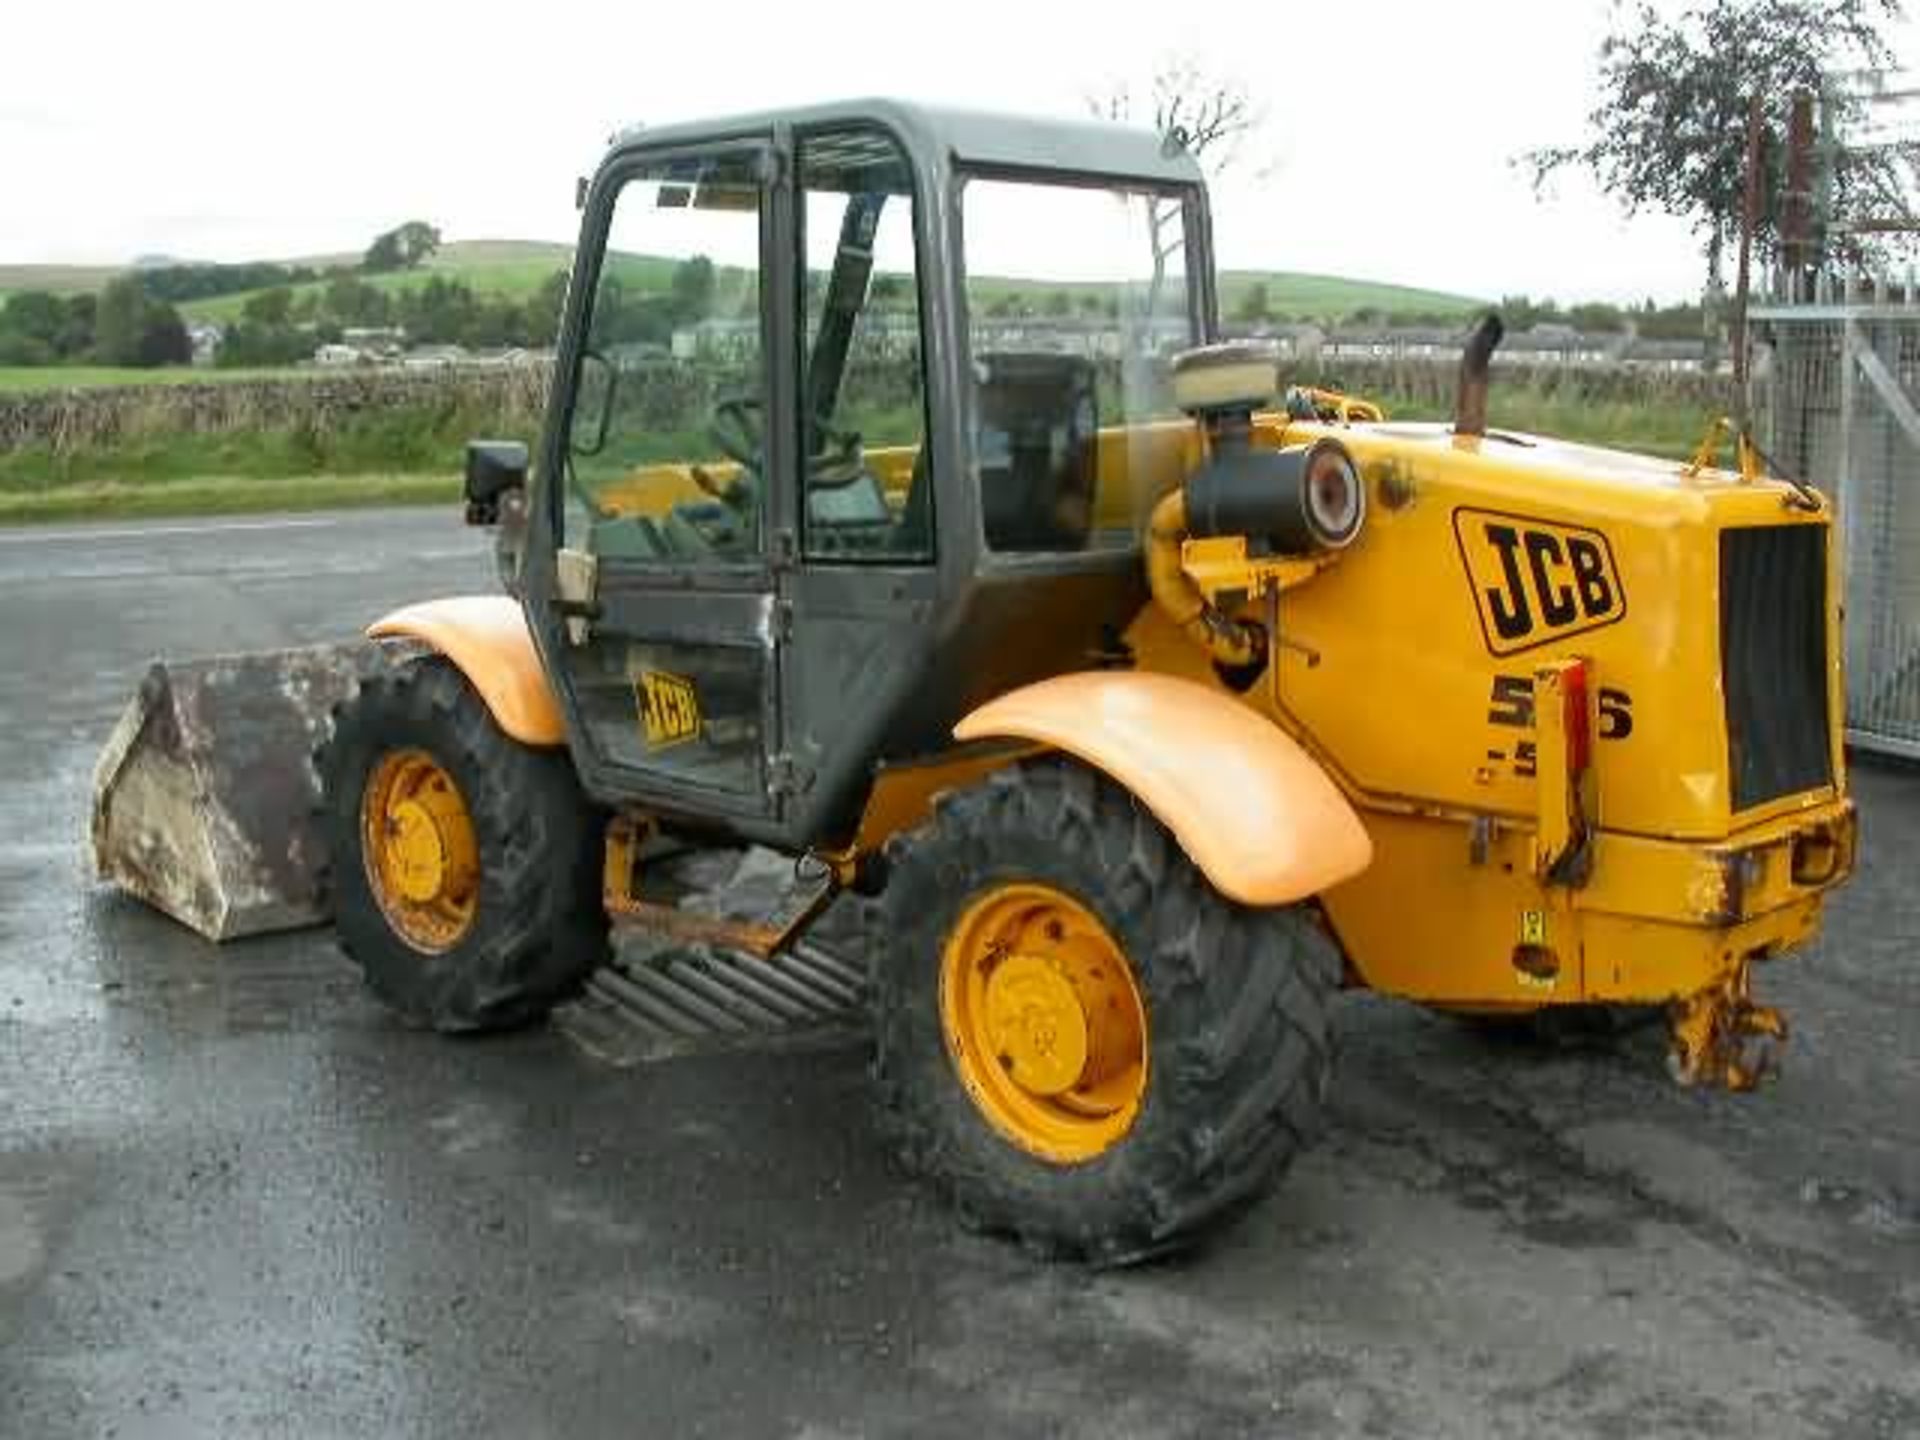 1996 Case JCB 526/55 with Bucket - Image 3 of 5